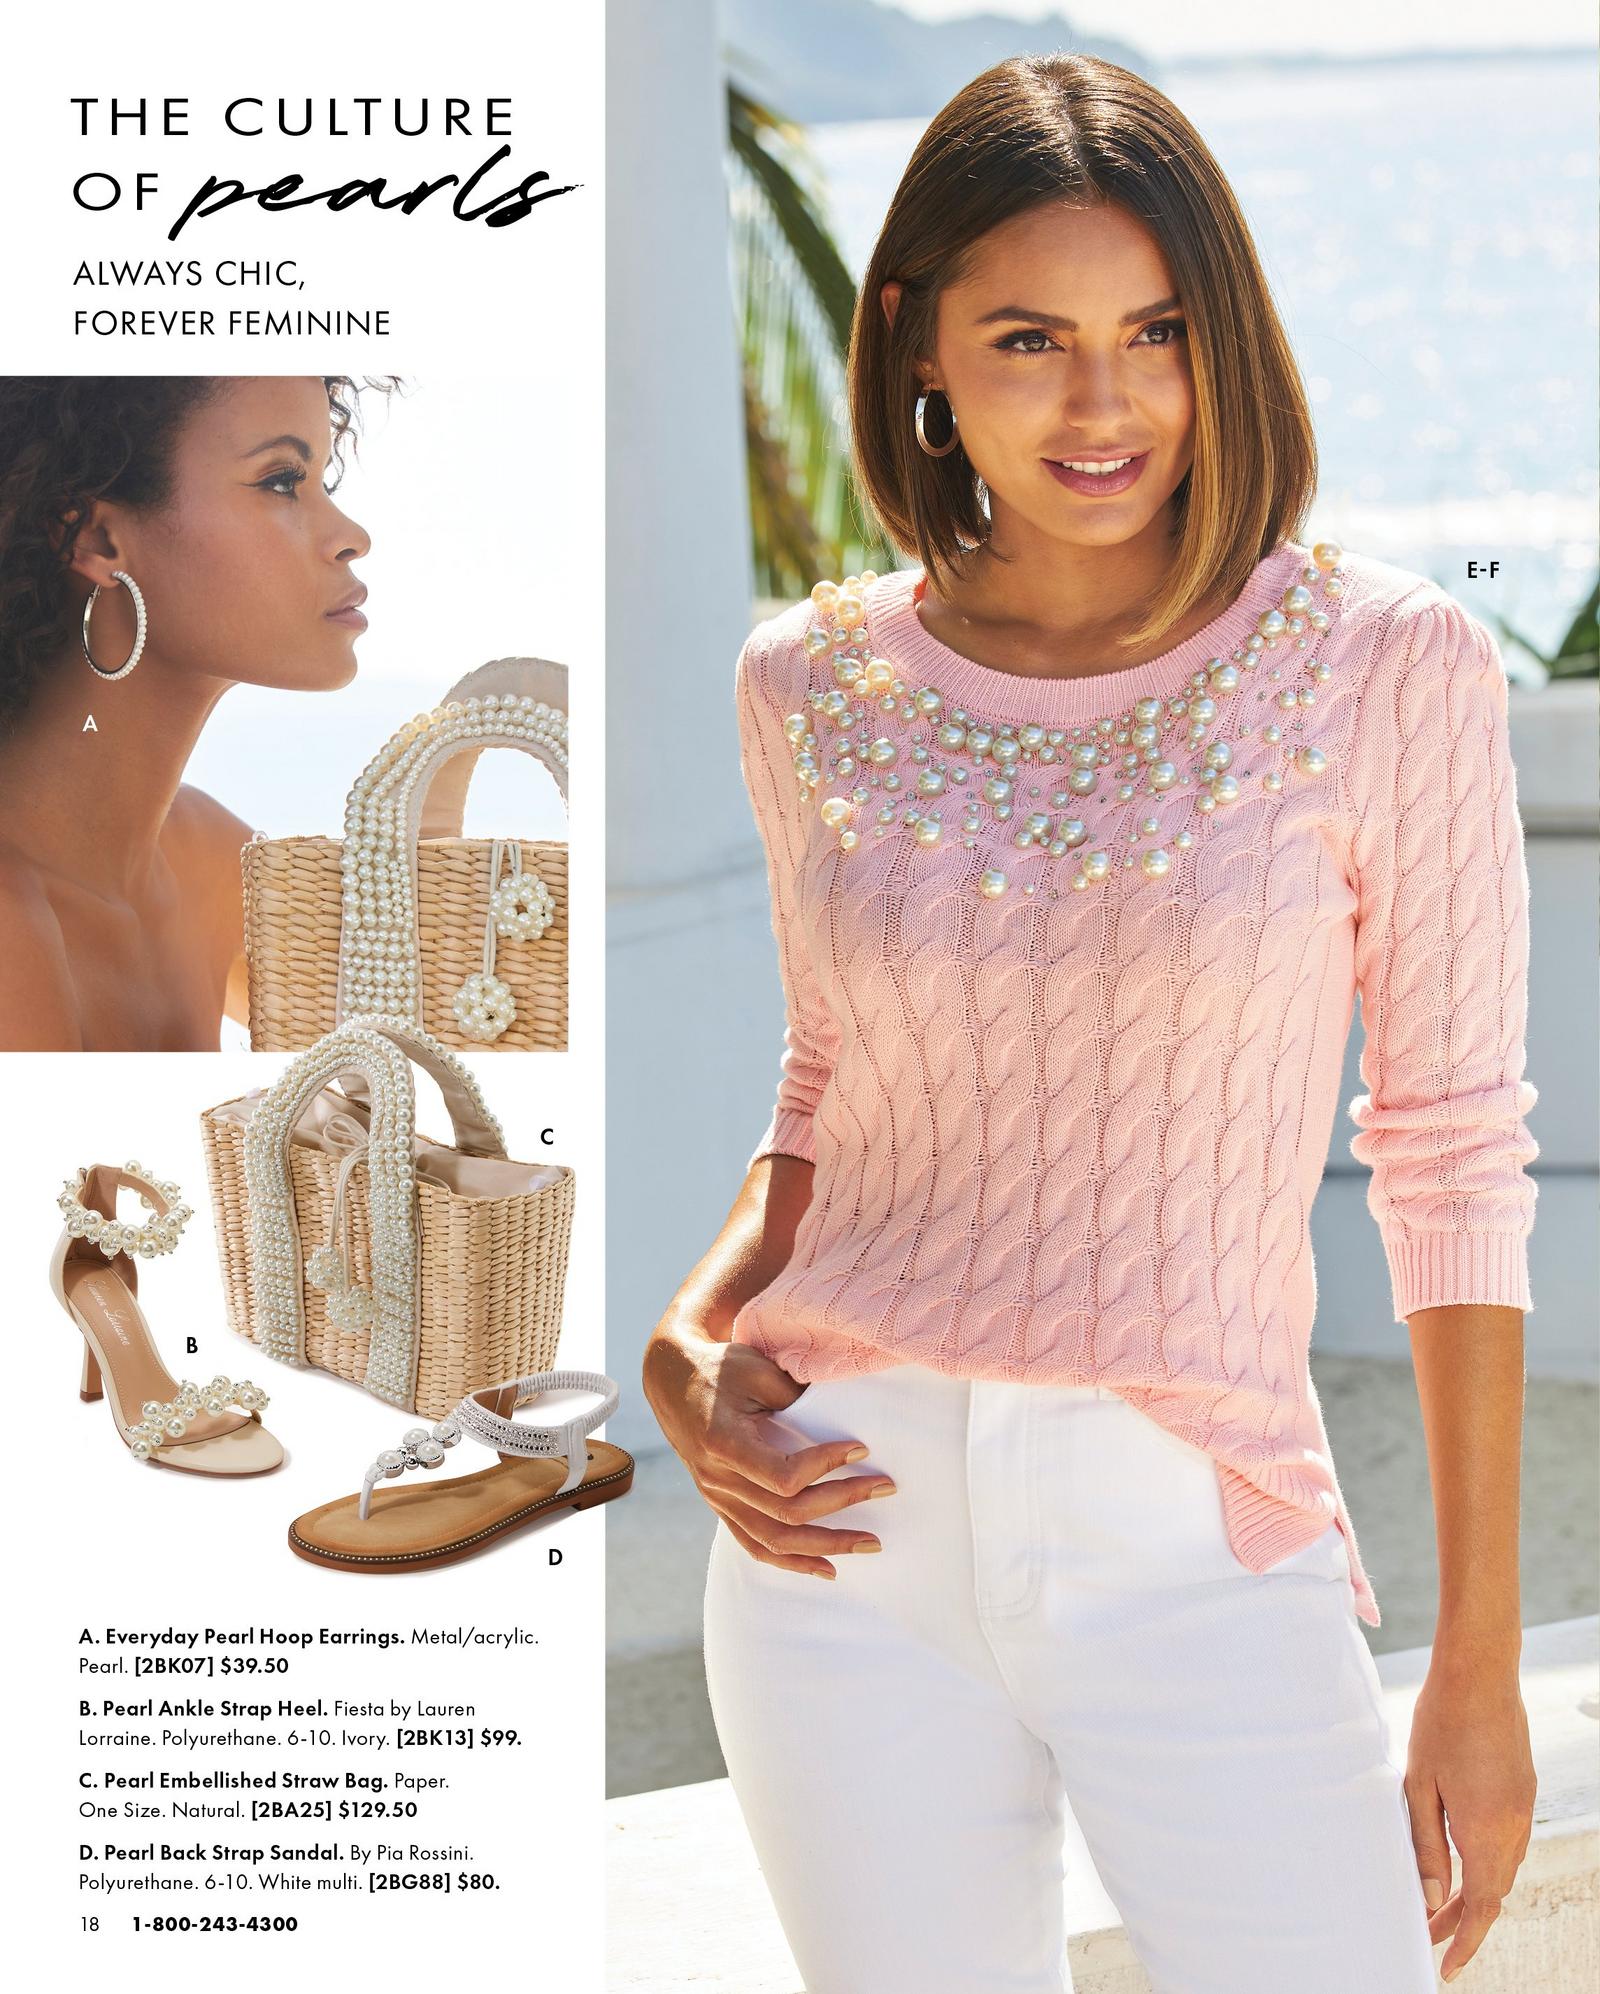 left panel shows pearl hoop earrings, pearl embellished straw bag, pearl embellished ankle strap heels, and pearl embellished flat sandals. right model wearing a pink pearl embellished cable-knit sweater and white jeans.